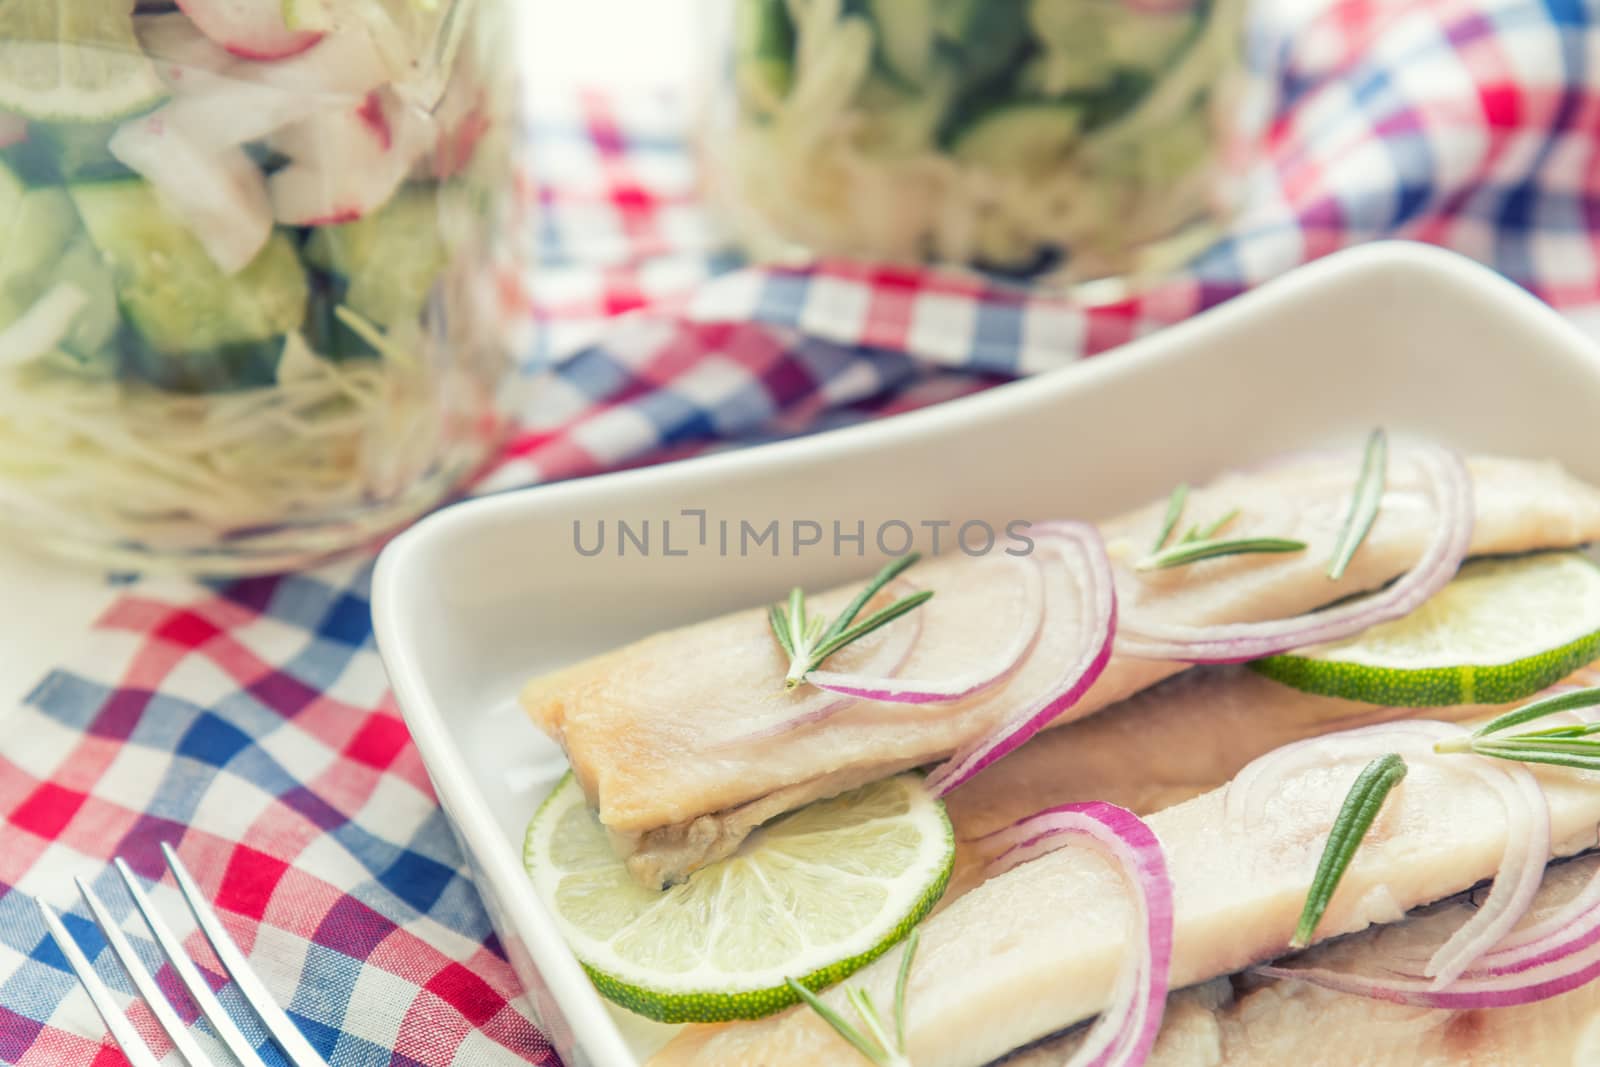 Sliced herring fillets, cut onion and lime by ArtSvitlyna